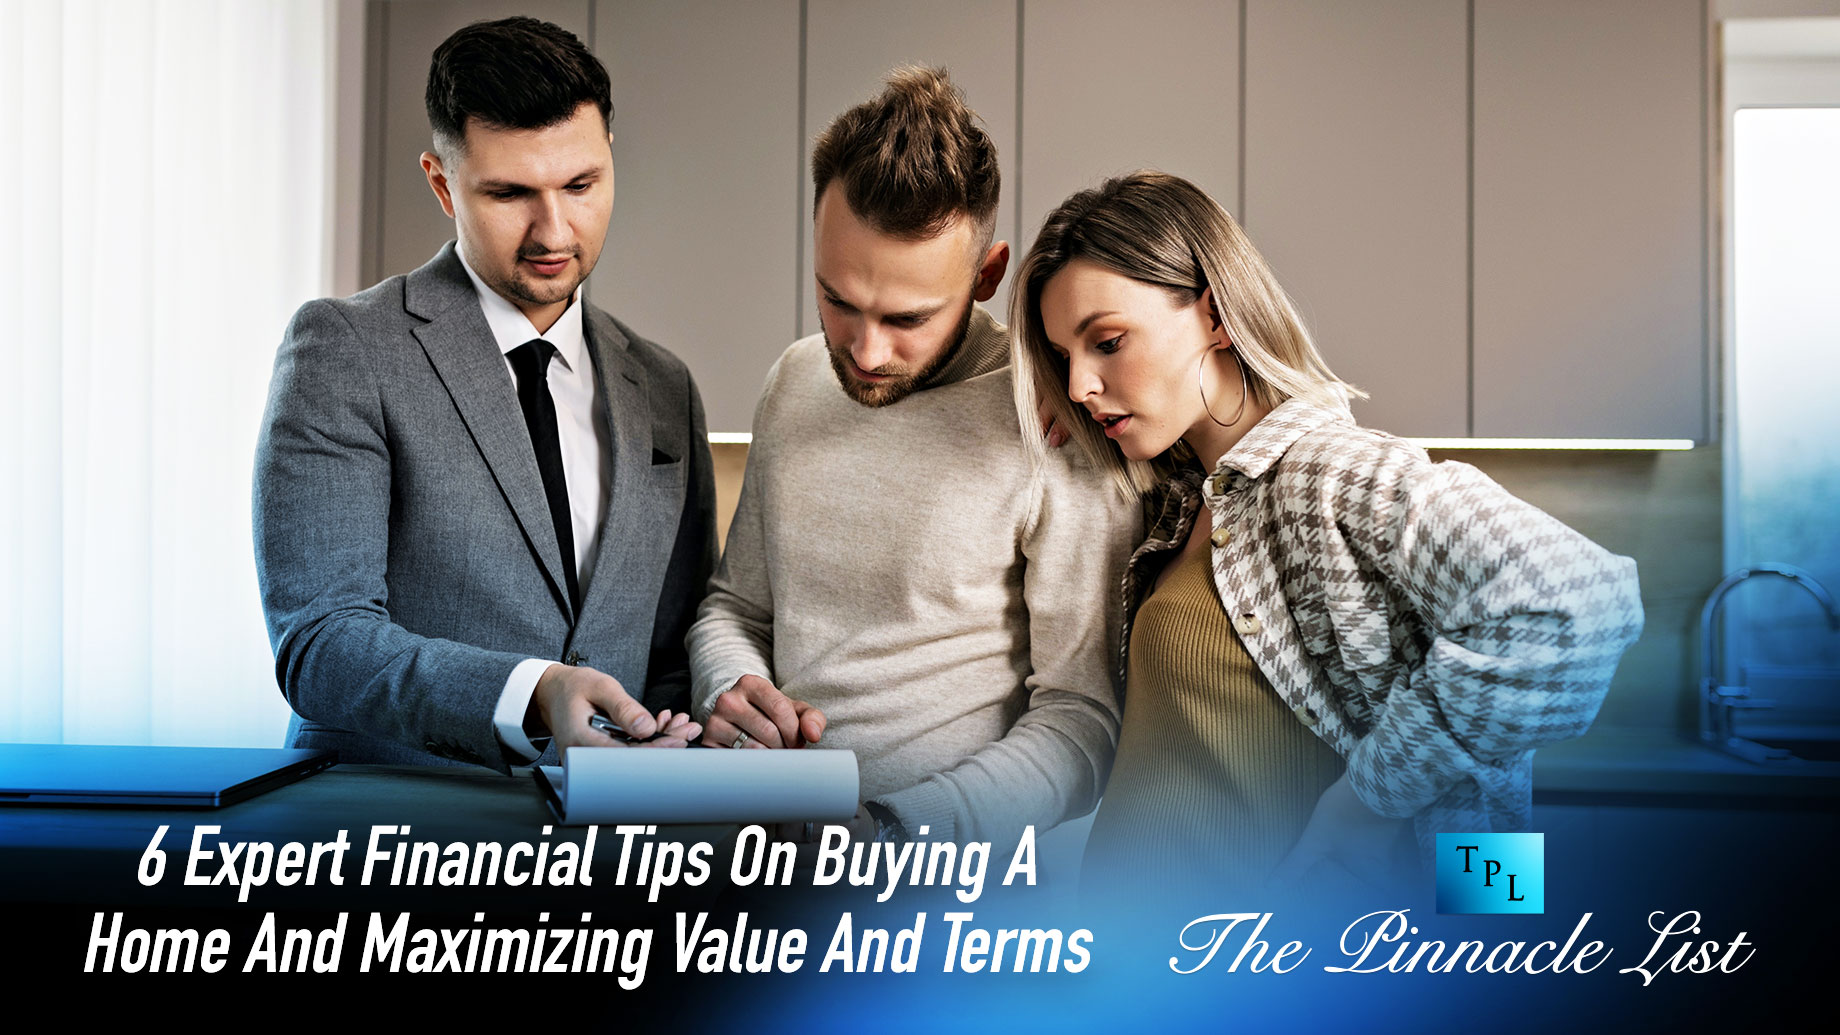 6 Expert Financial Tips On Buying Home And Maximizing Value And Terms